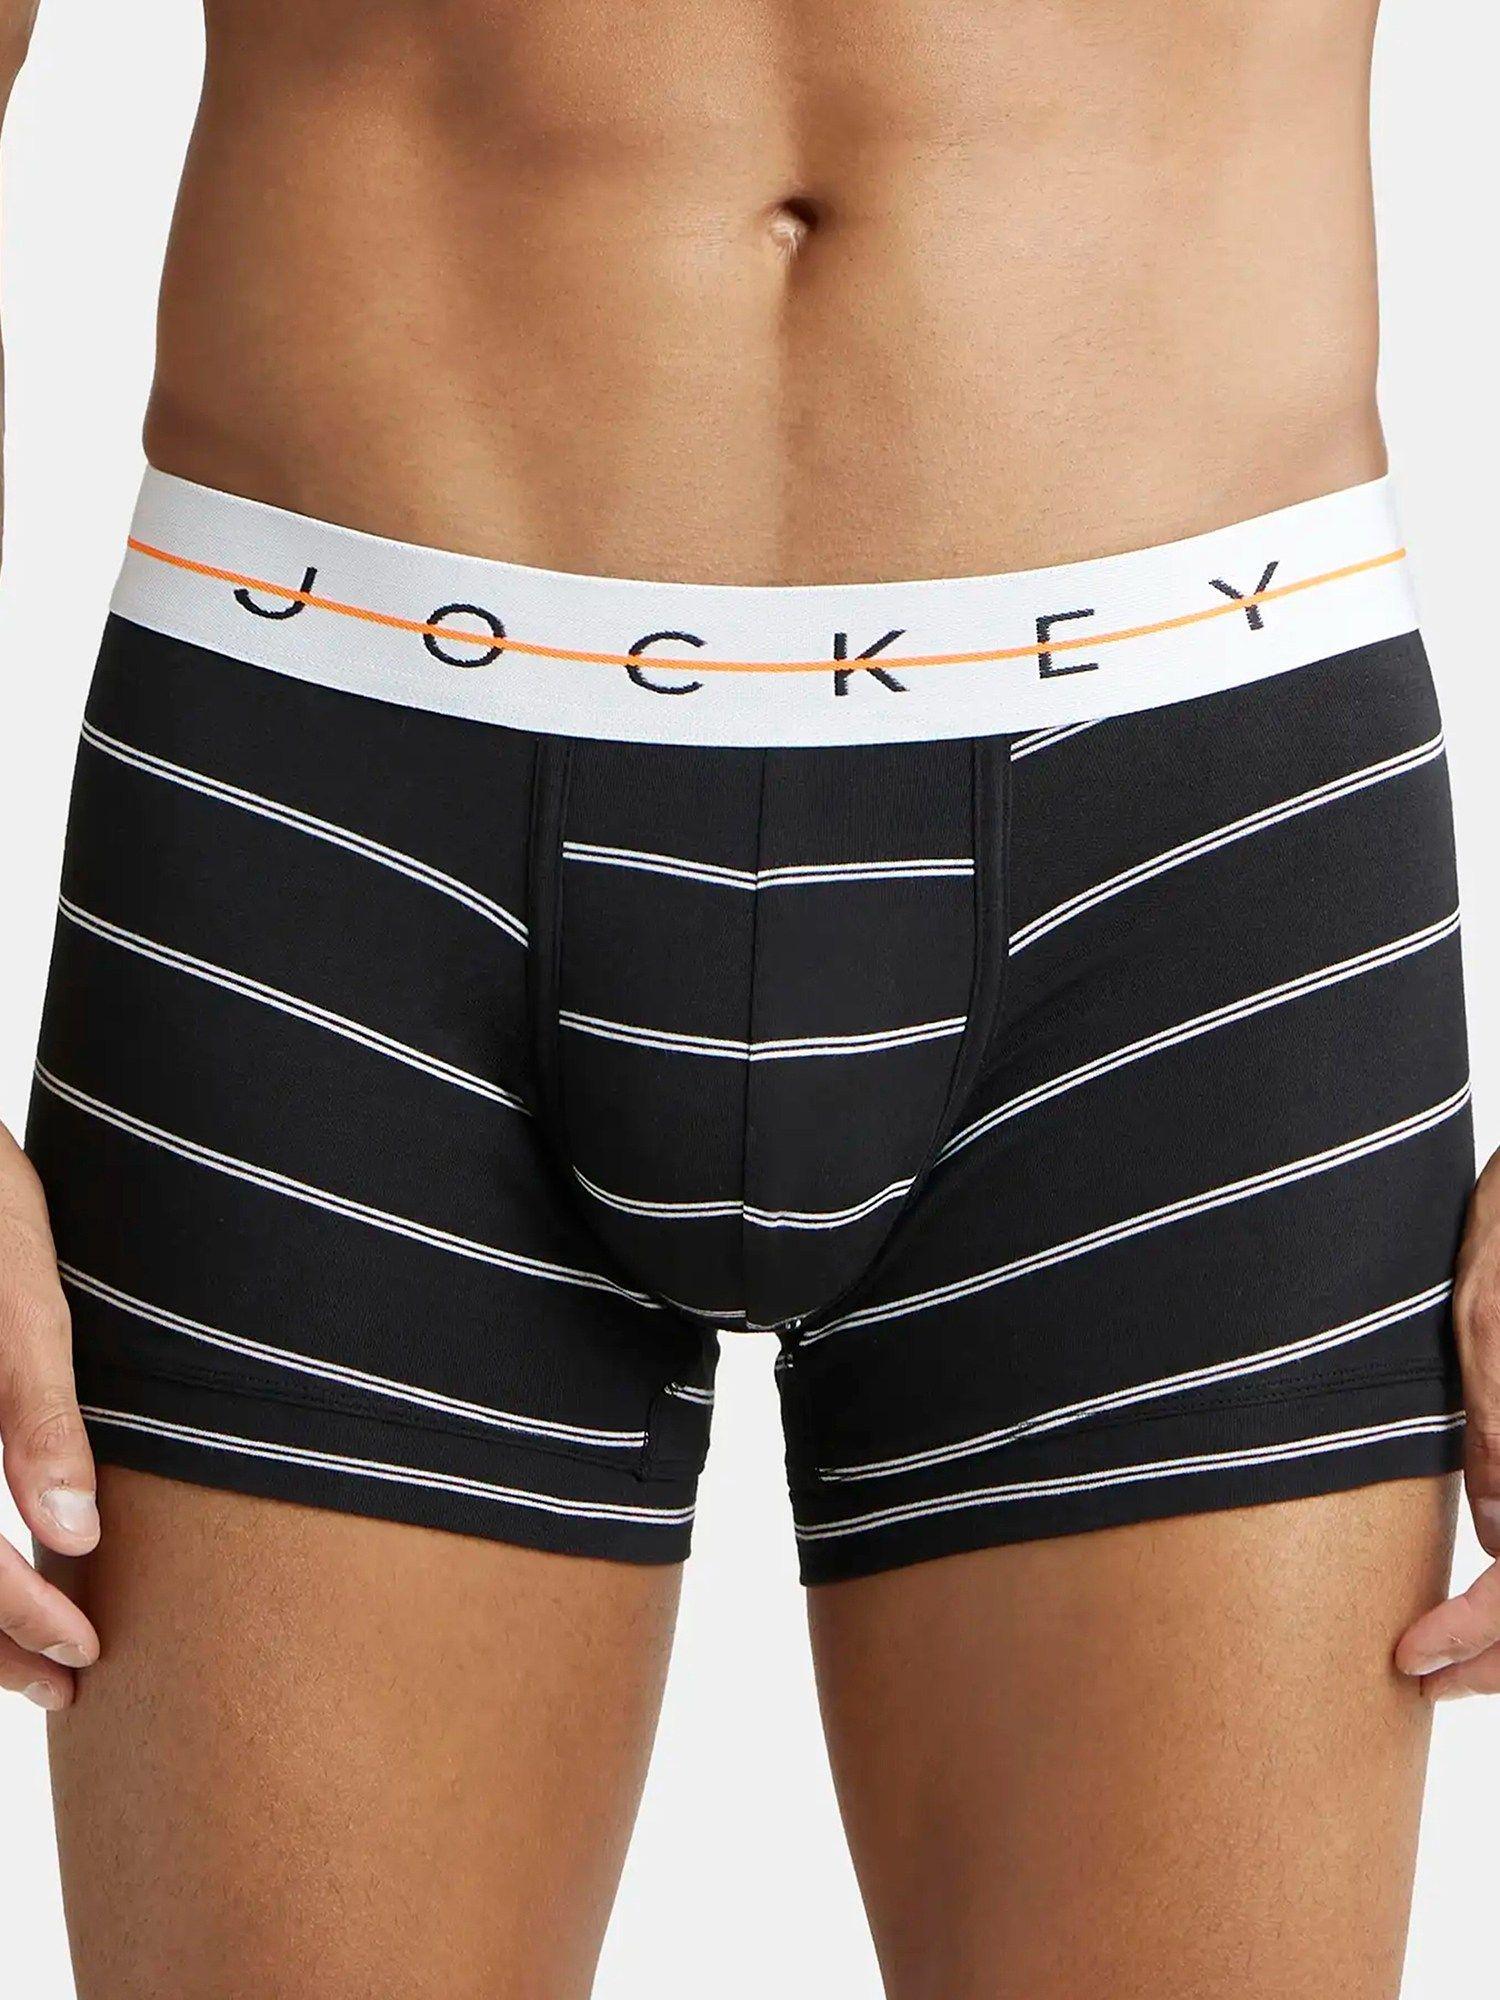 ny02 mens super cotton printed trunk with ultrasoft waistband-black